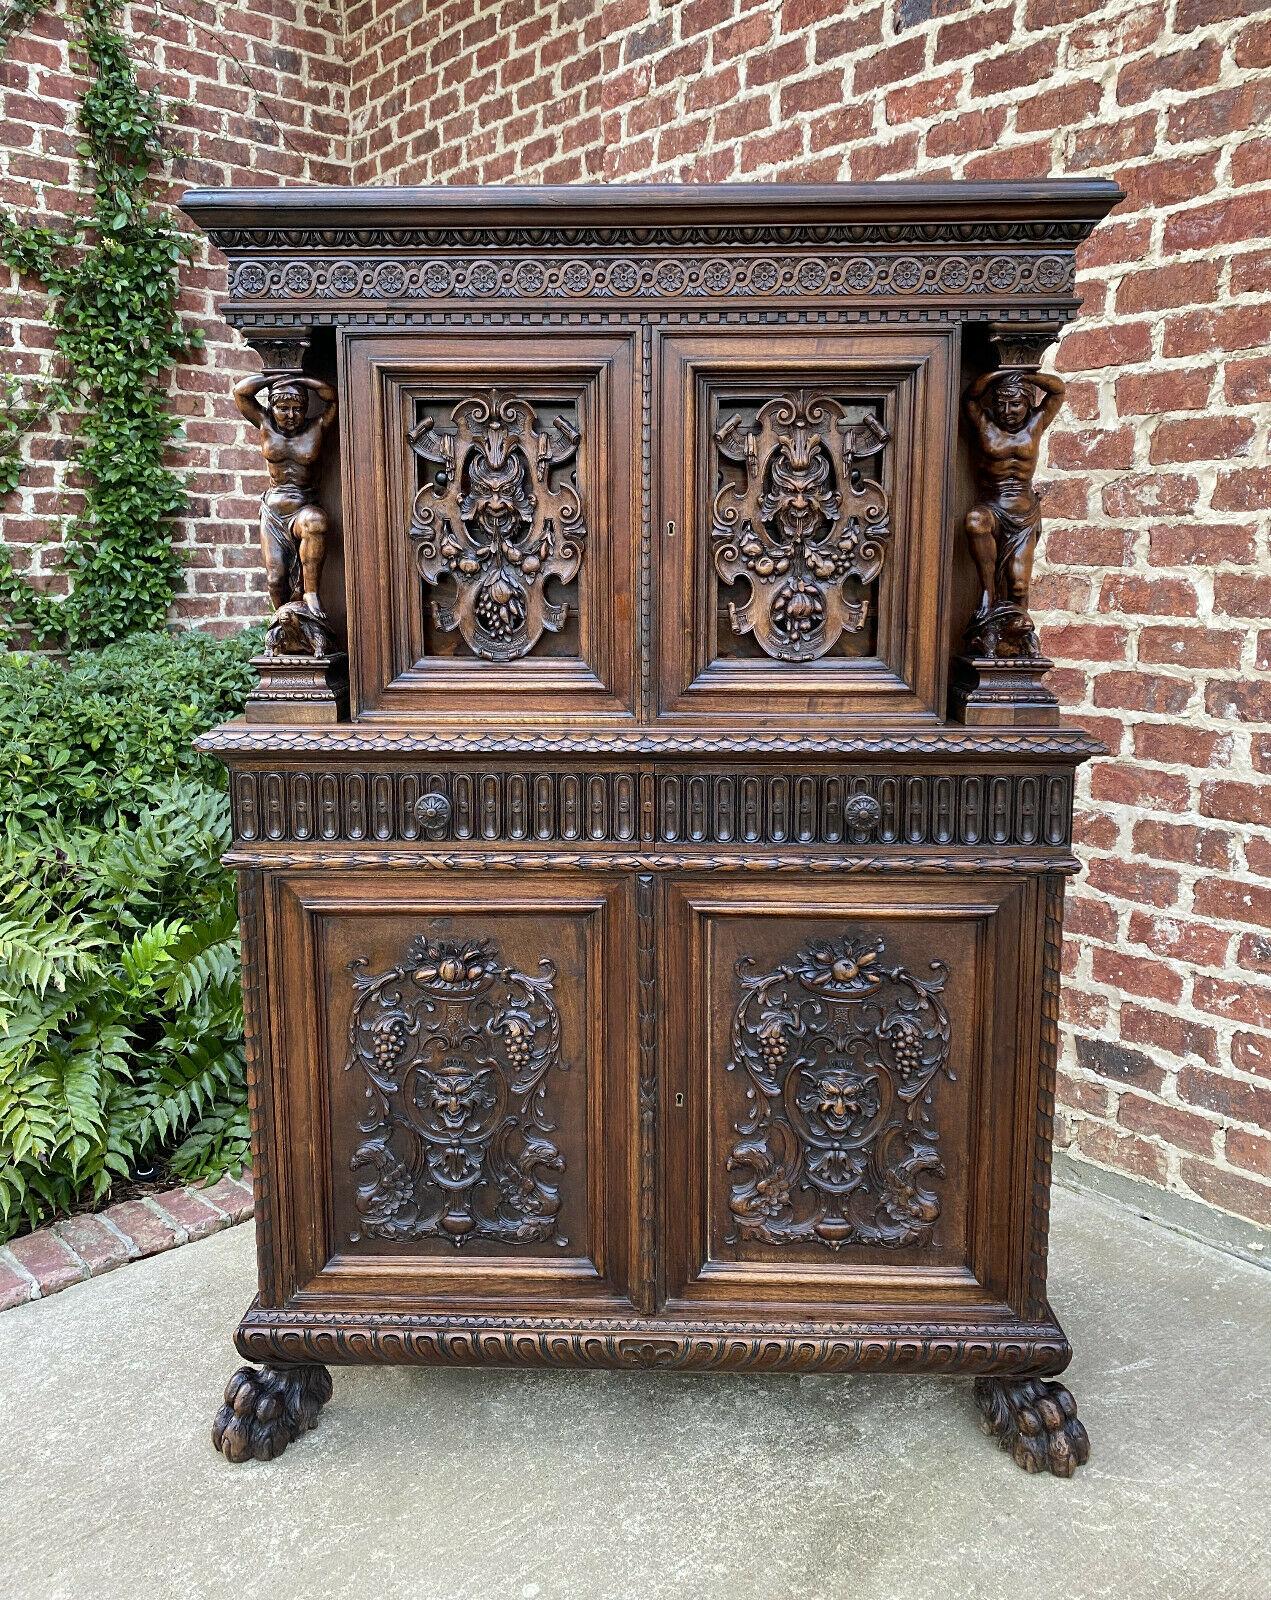 Superb antique French walnut Renaissance revival cabinet, cupboard, jewelry cabinet or apothecary~~neo classical male figures standing on turtles~~rare~~c. 1880s

This is a must see~~rare 19th century commissioned piece with exquisitely carved Neo